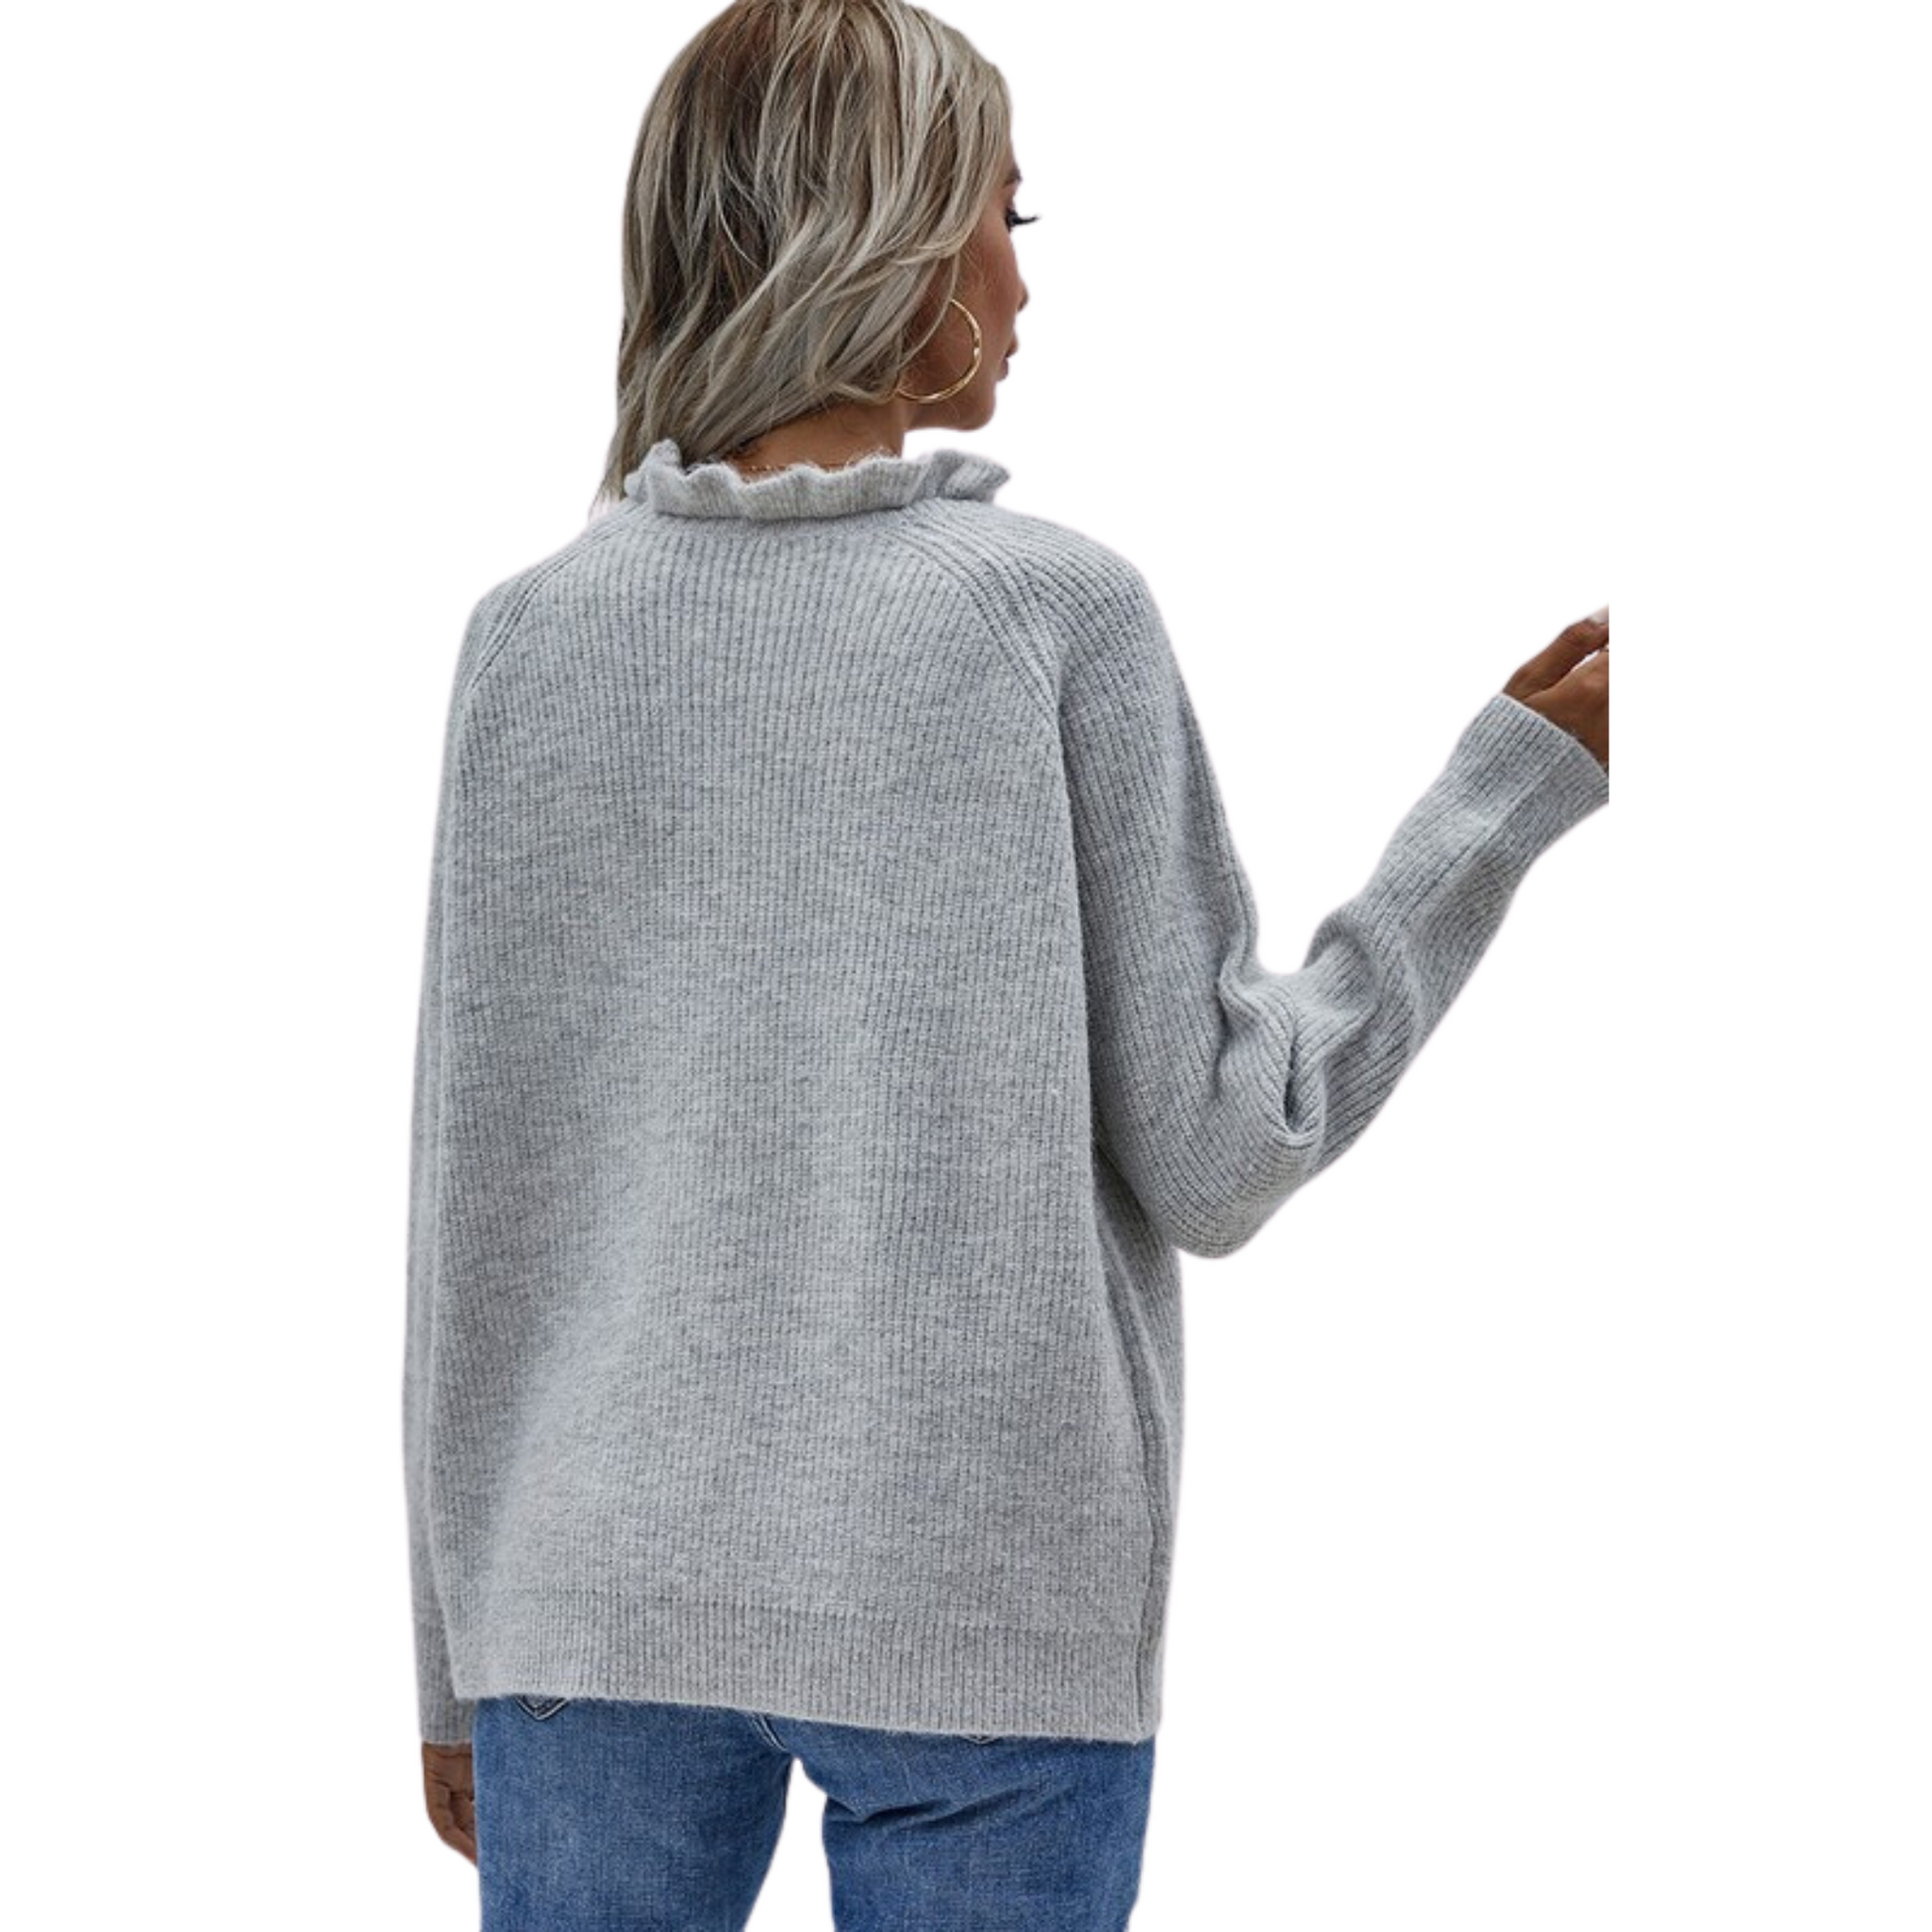 This Casual Knit Sweater is a versatile addition to any wardrobe. Its classic grey color easily pairs with any outfit and is sure to become a staple in your wardrobe. Crafted from high quality, durable fabric, you'll love the cozy feel and timeless style this sweater provides.